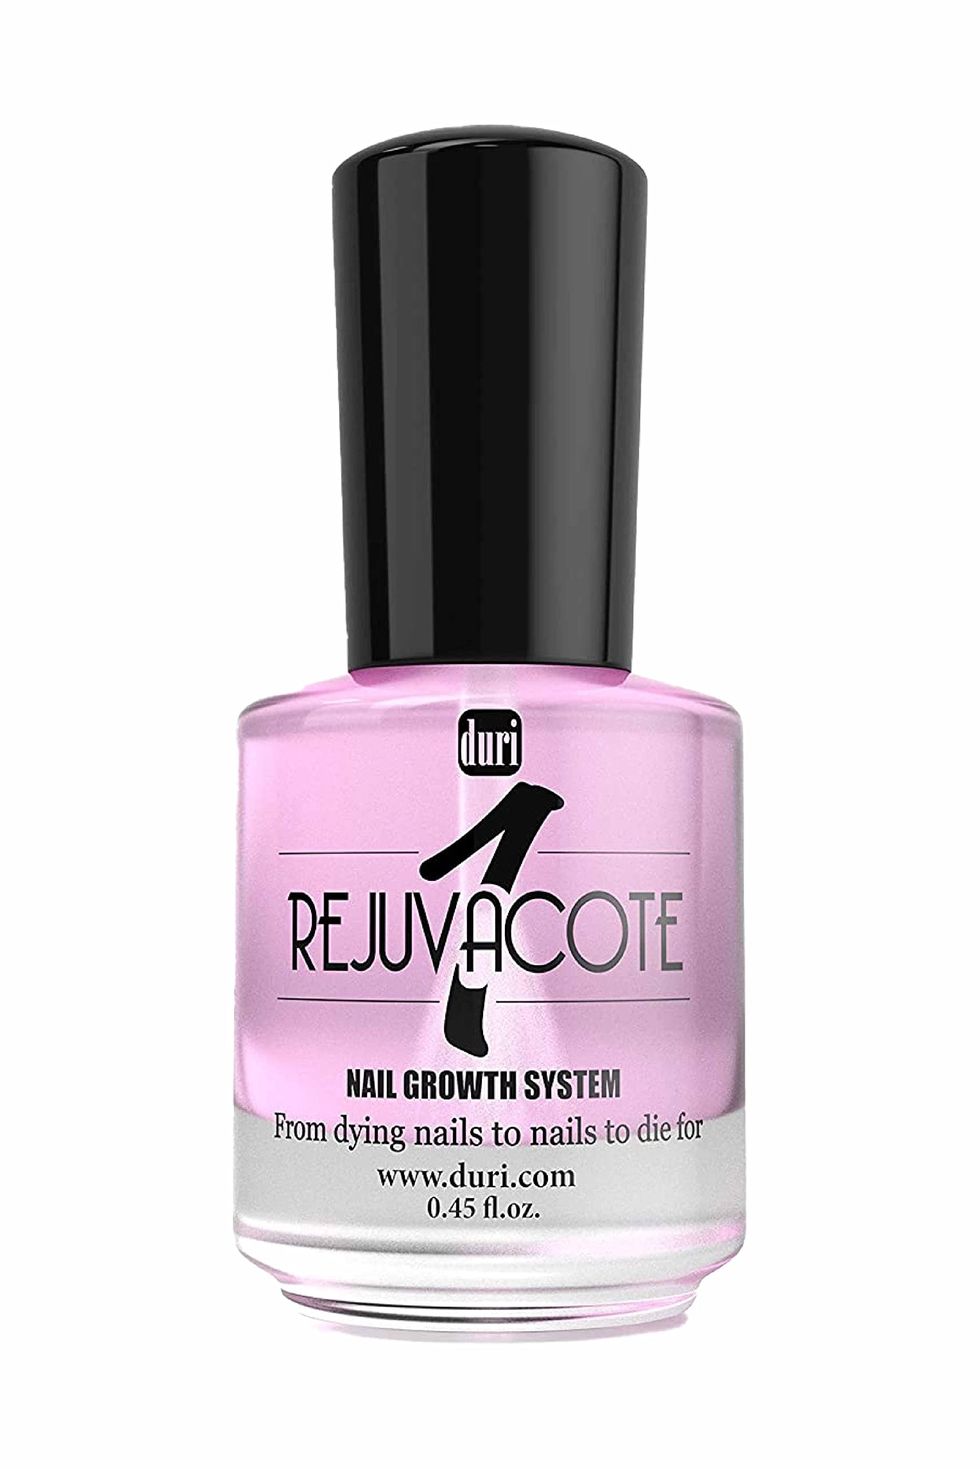 Rejuvacote 1 Nail Growth System